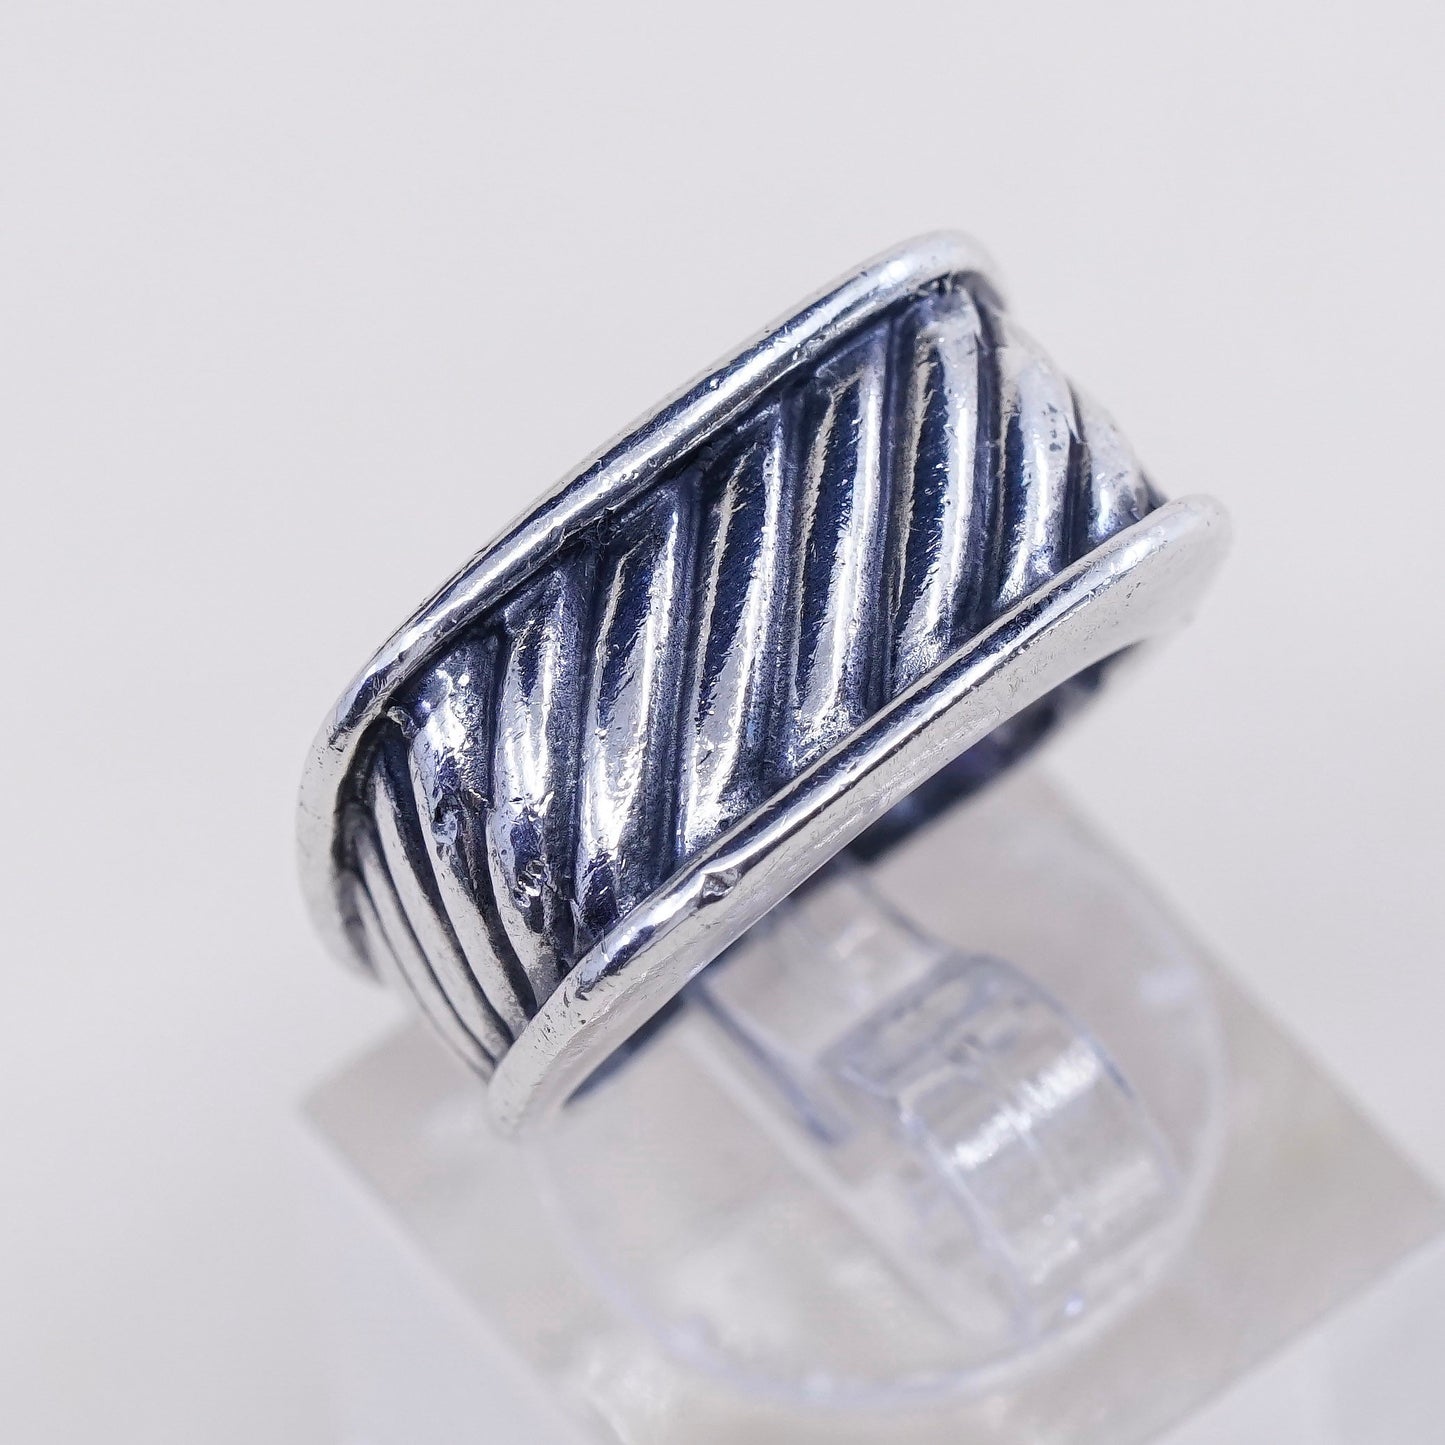 sz 6, vtg sterling silver handmade statement ring, 925 cable ribbed band